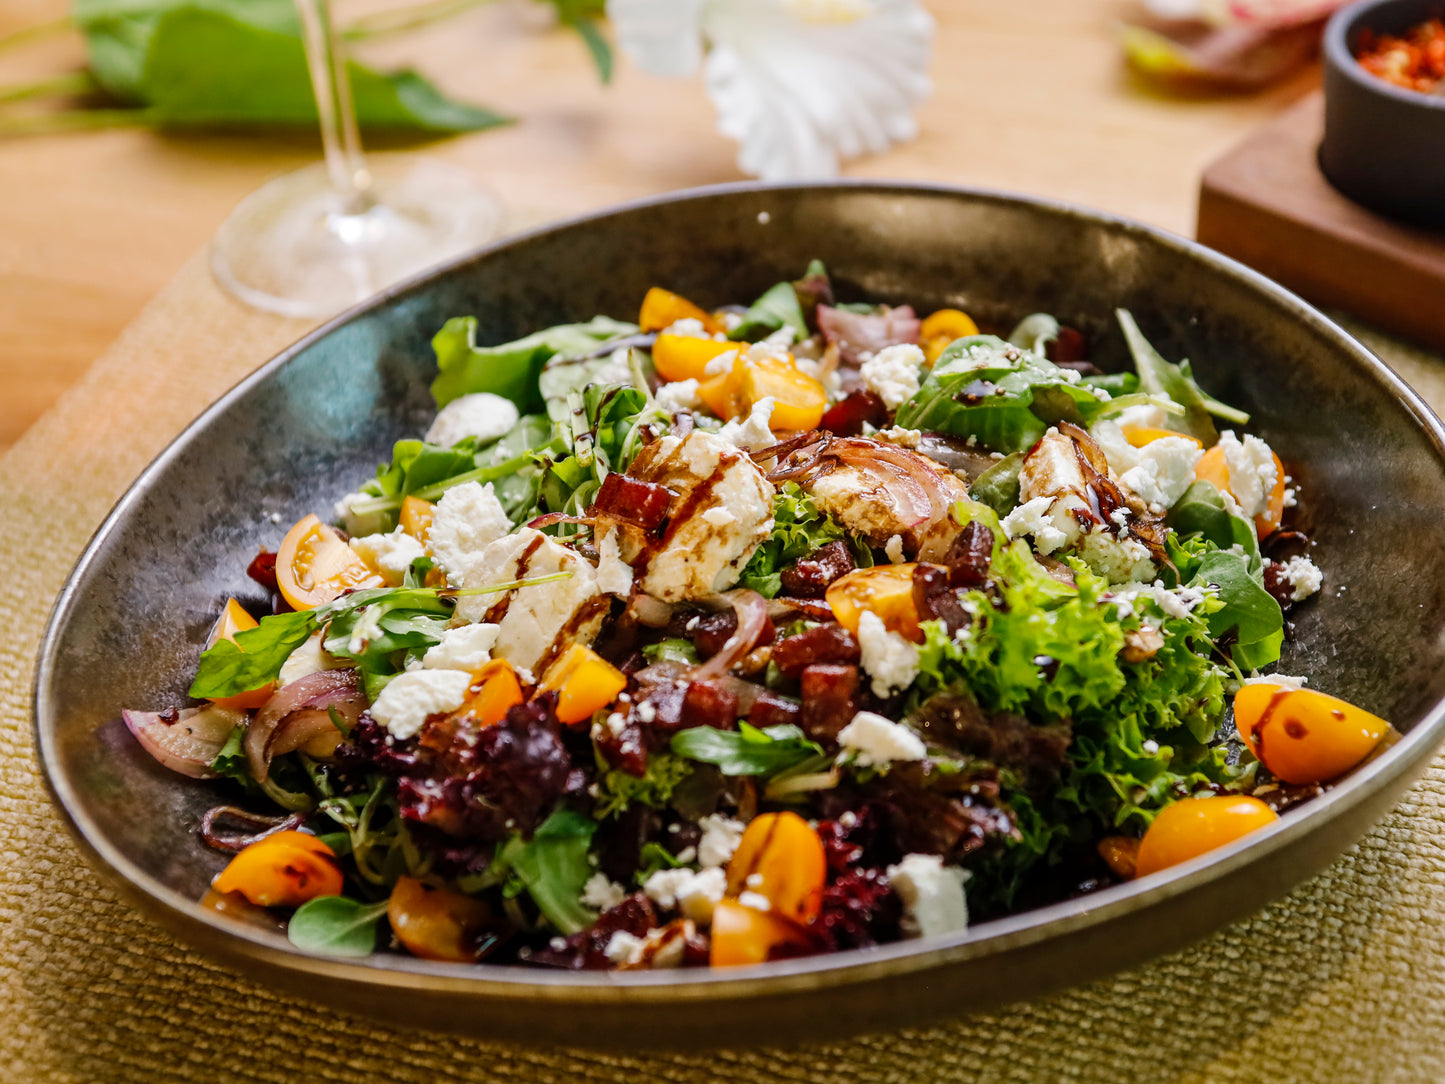 Roasted Beet and Goat Cheese Salad 360g